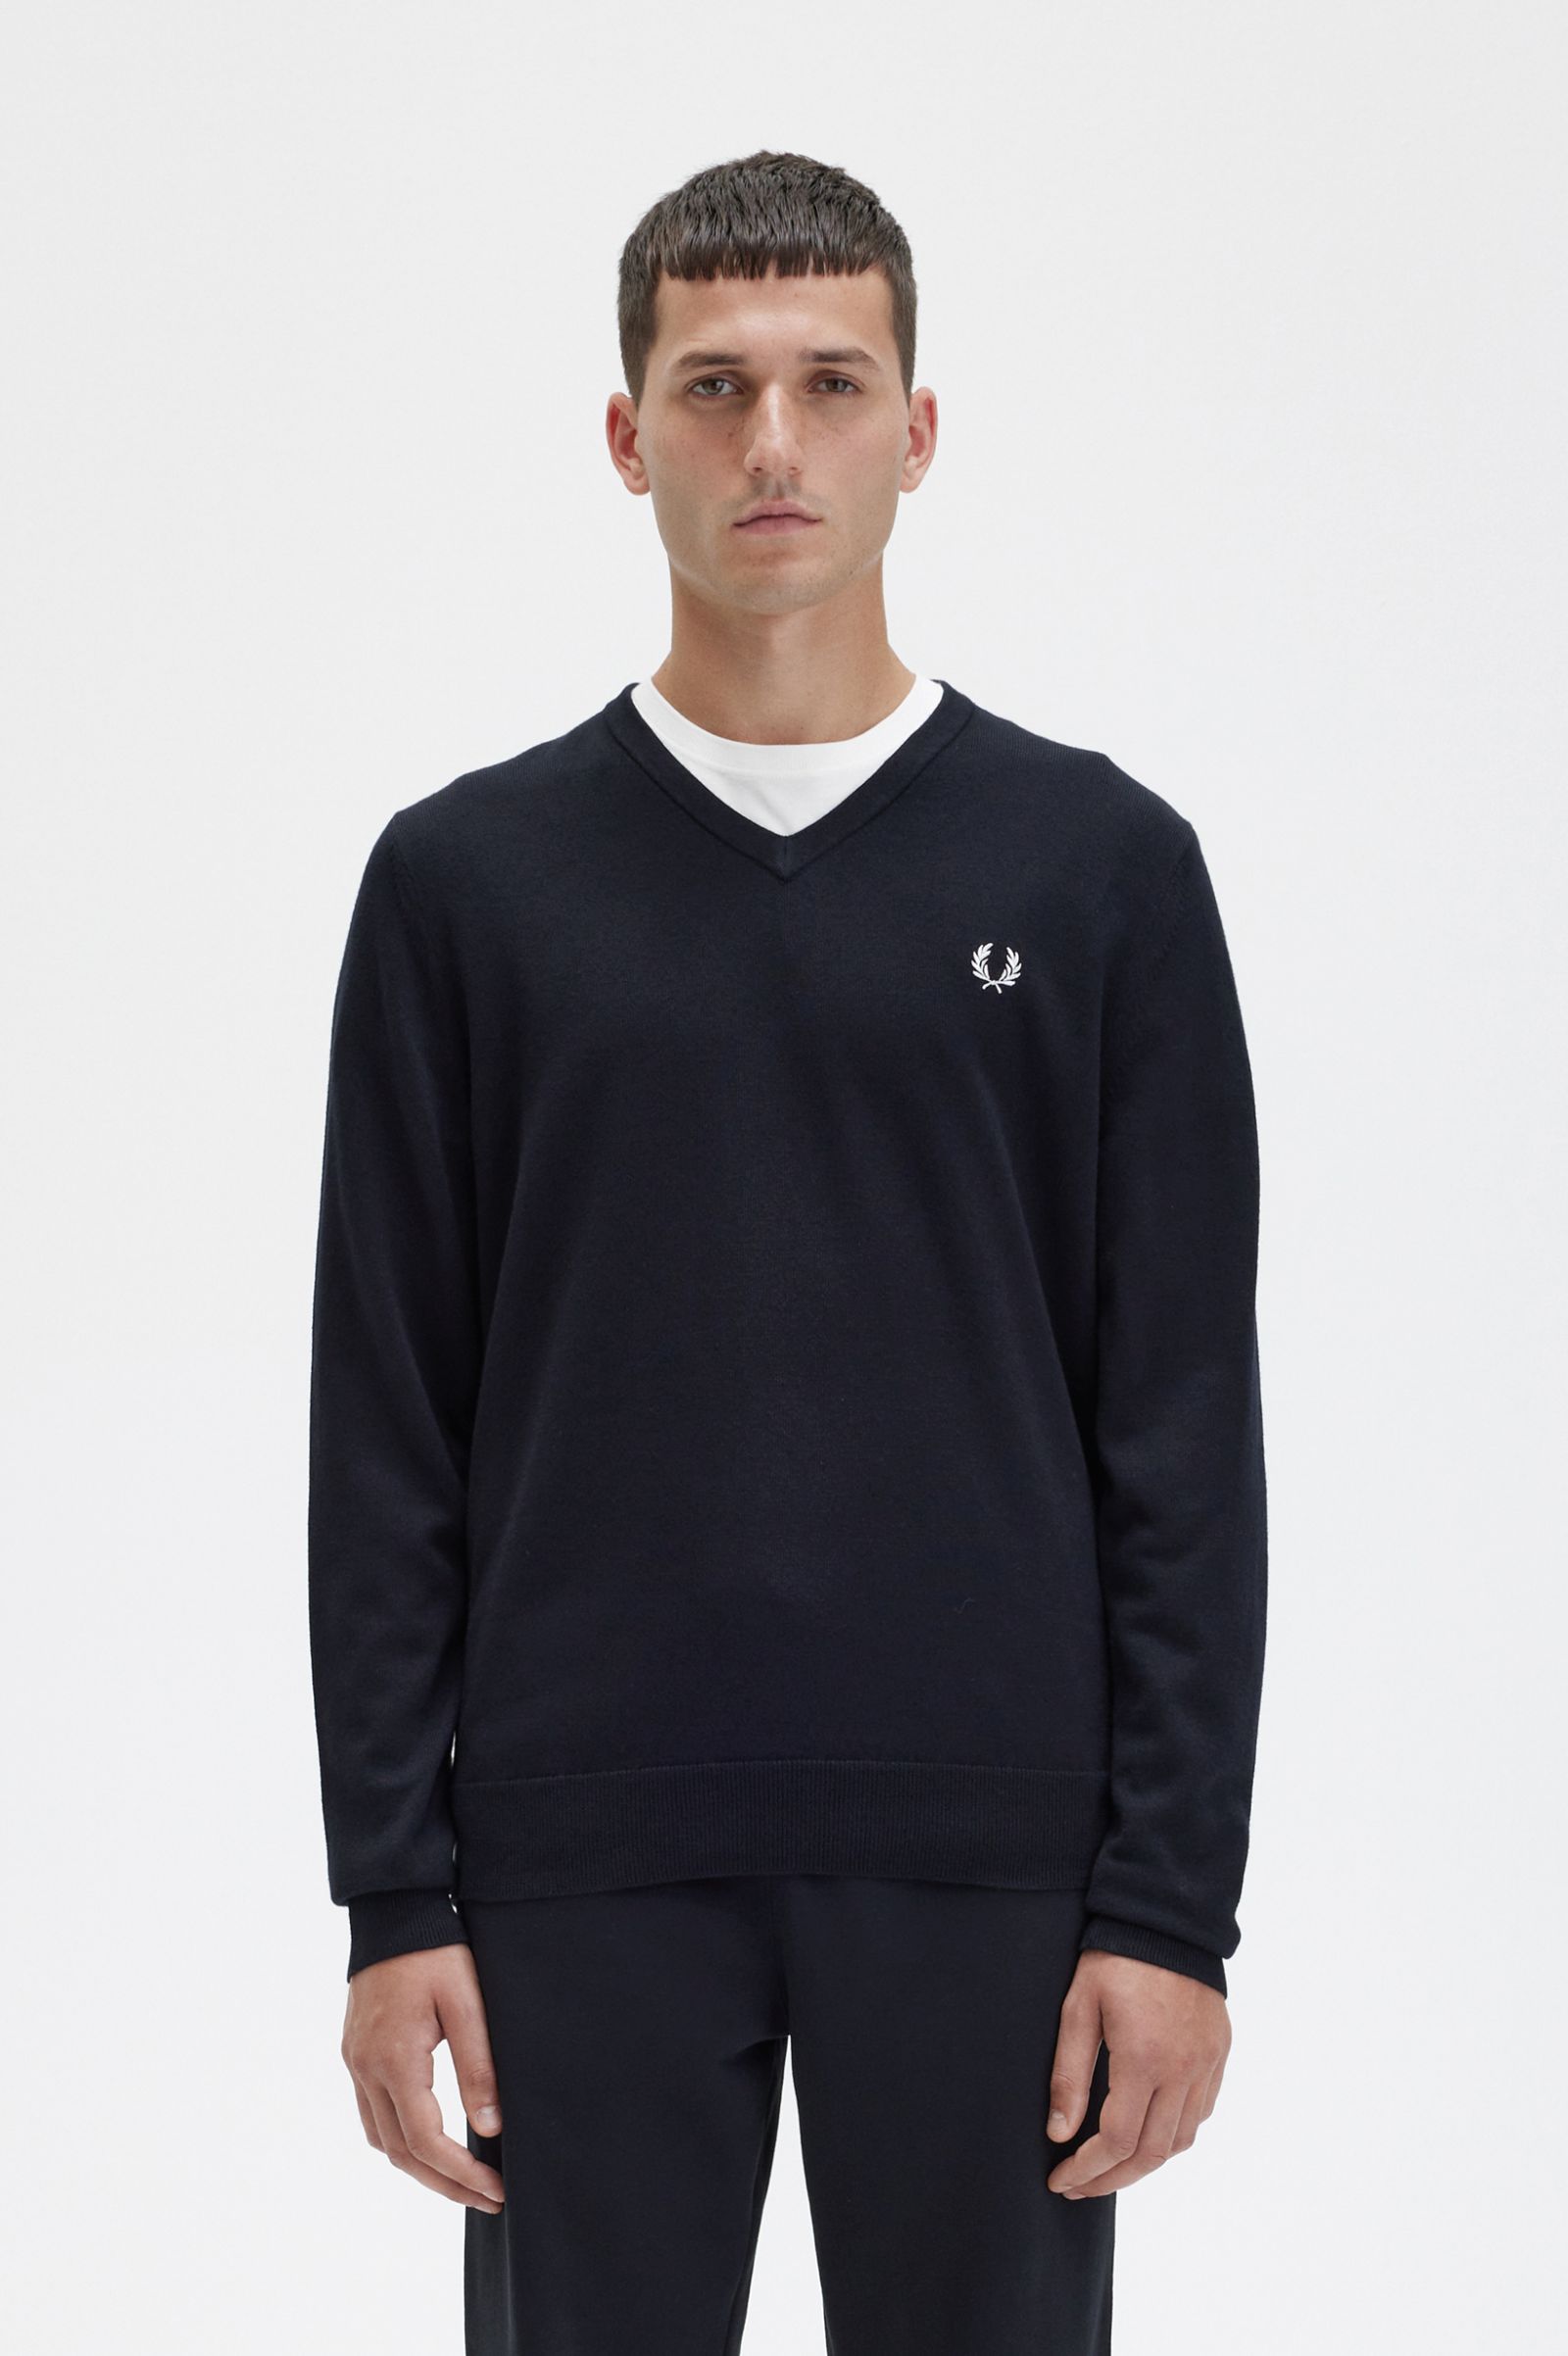 Fred Perry crew neck merino knitted jumper in burgundy marl